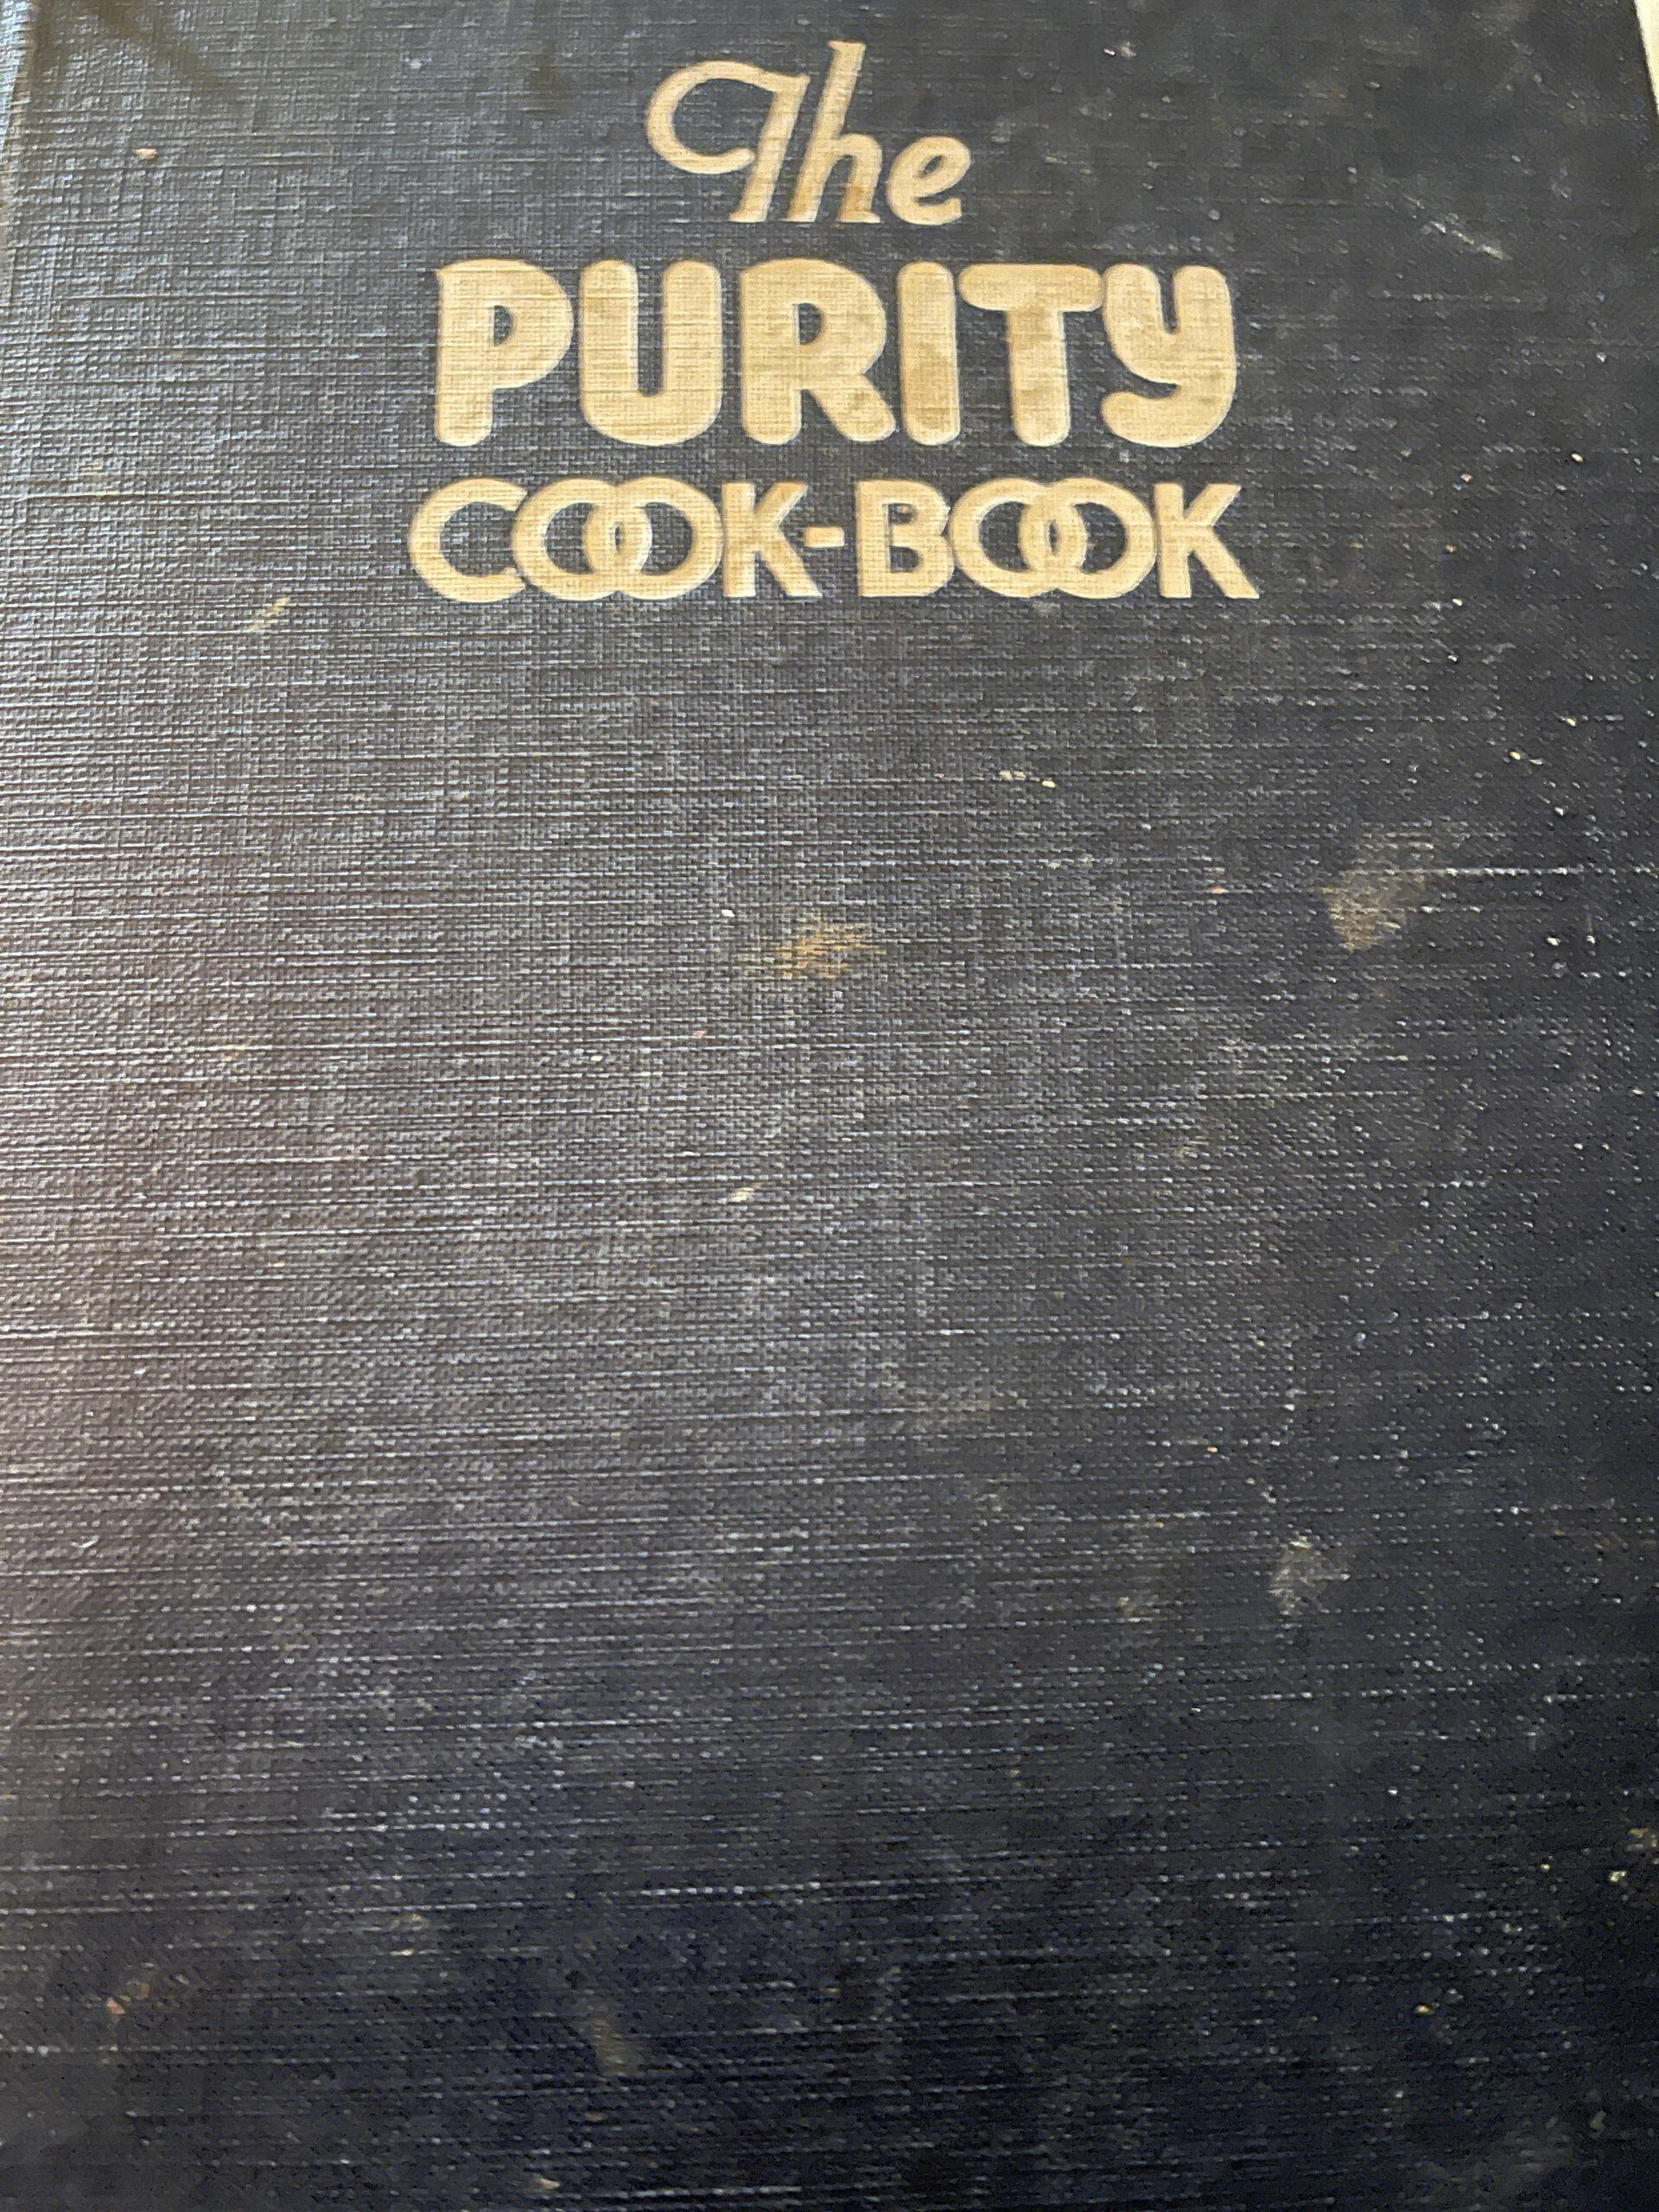 Purity Cook Book, 1937. All the recipes are here.